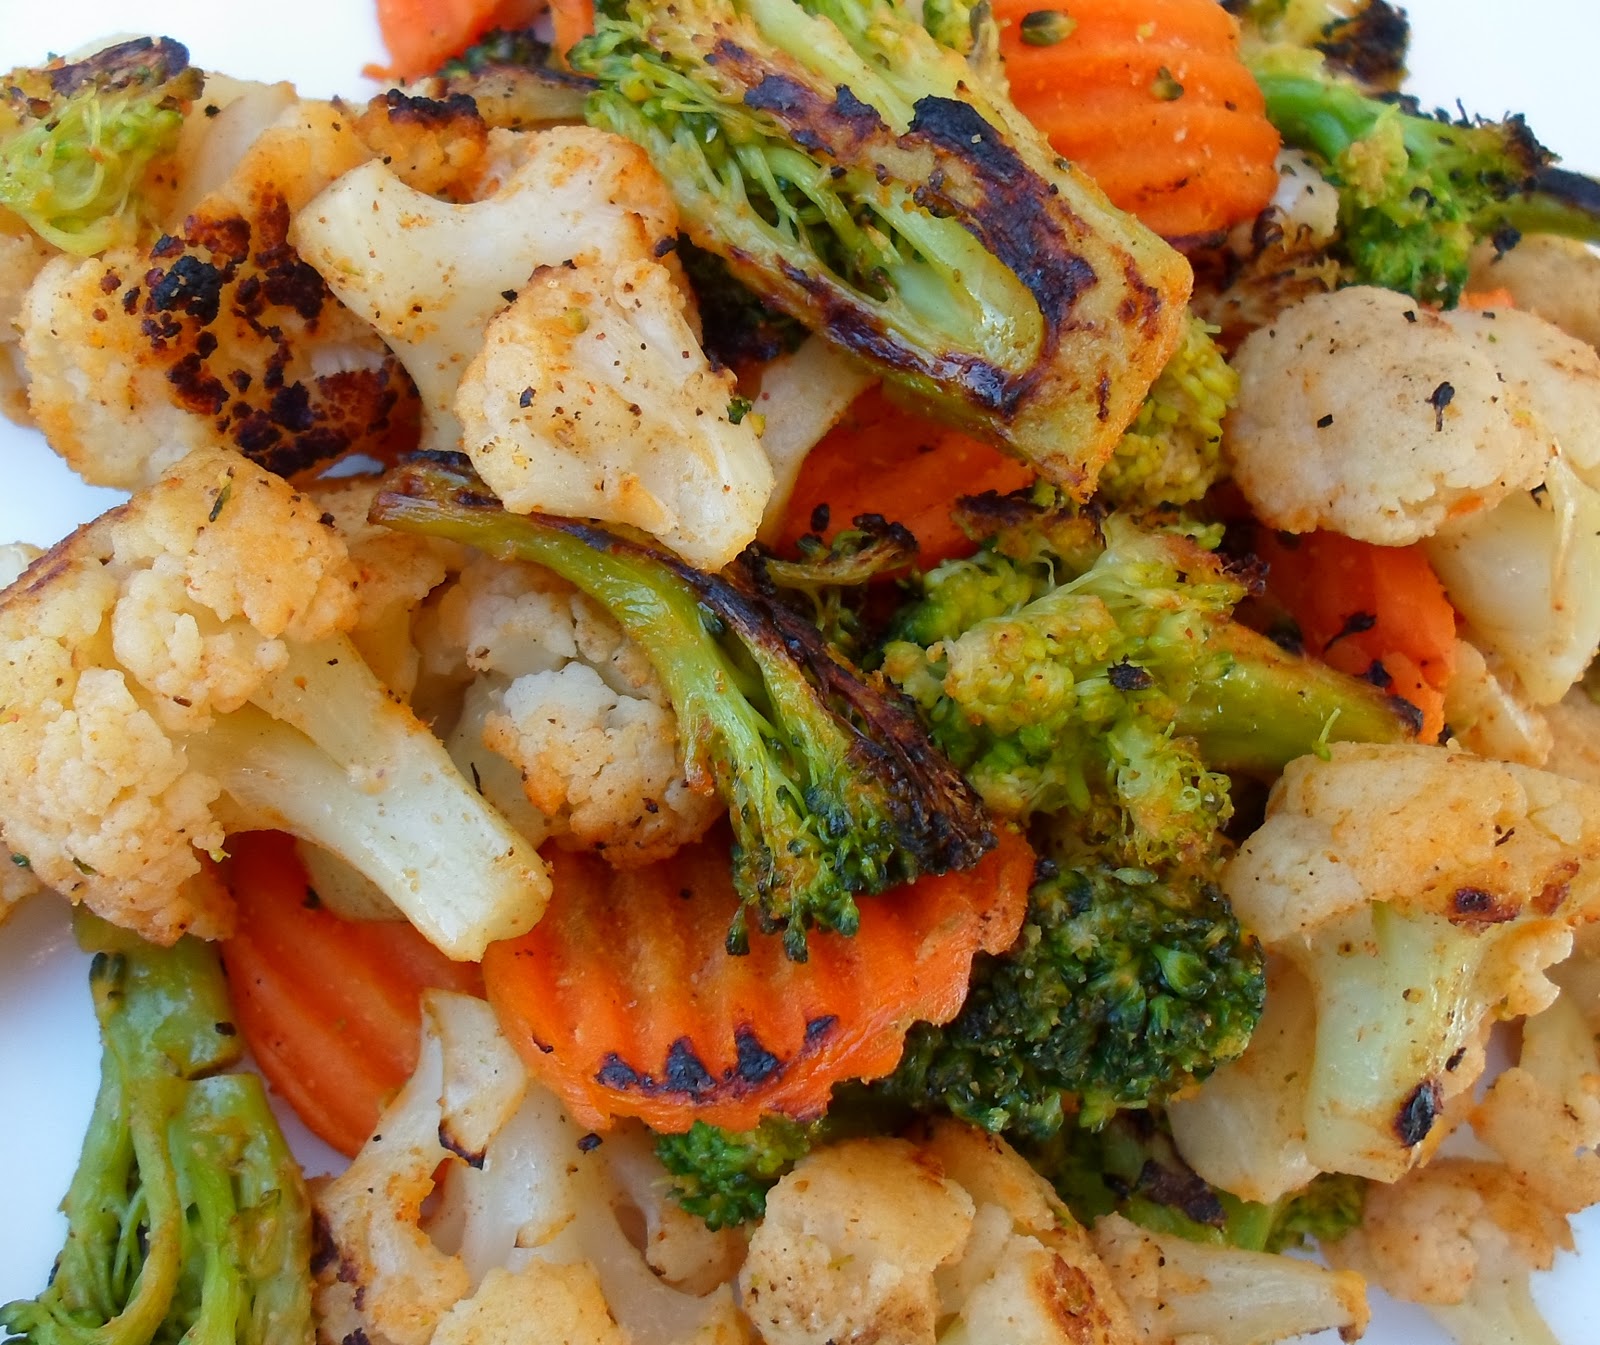 Grilled Frozen California Blend Vegetables (Broccoli, Cauliflower and Carro...